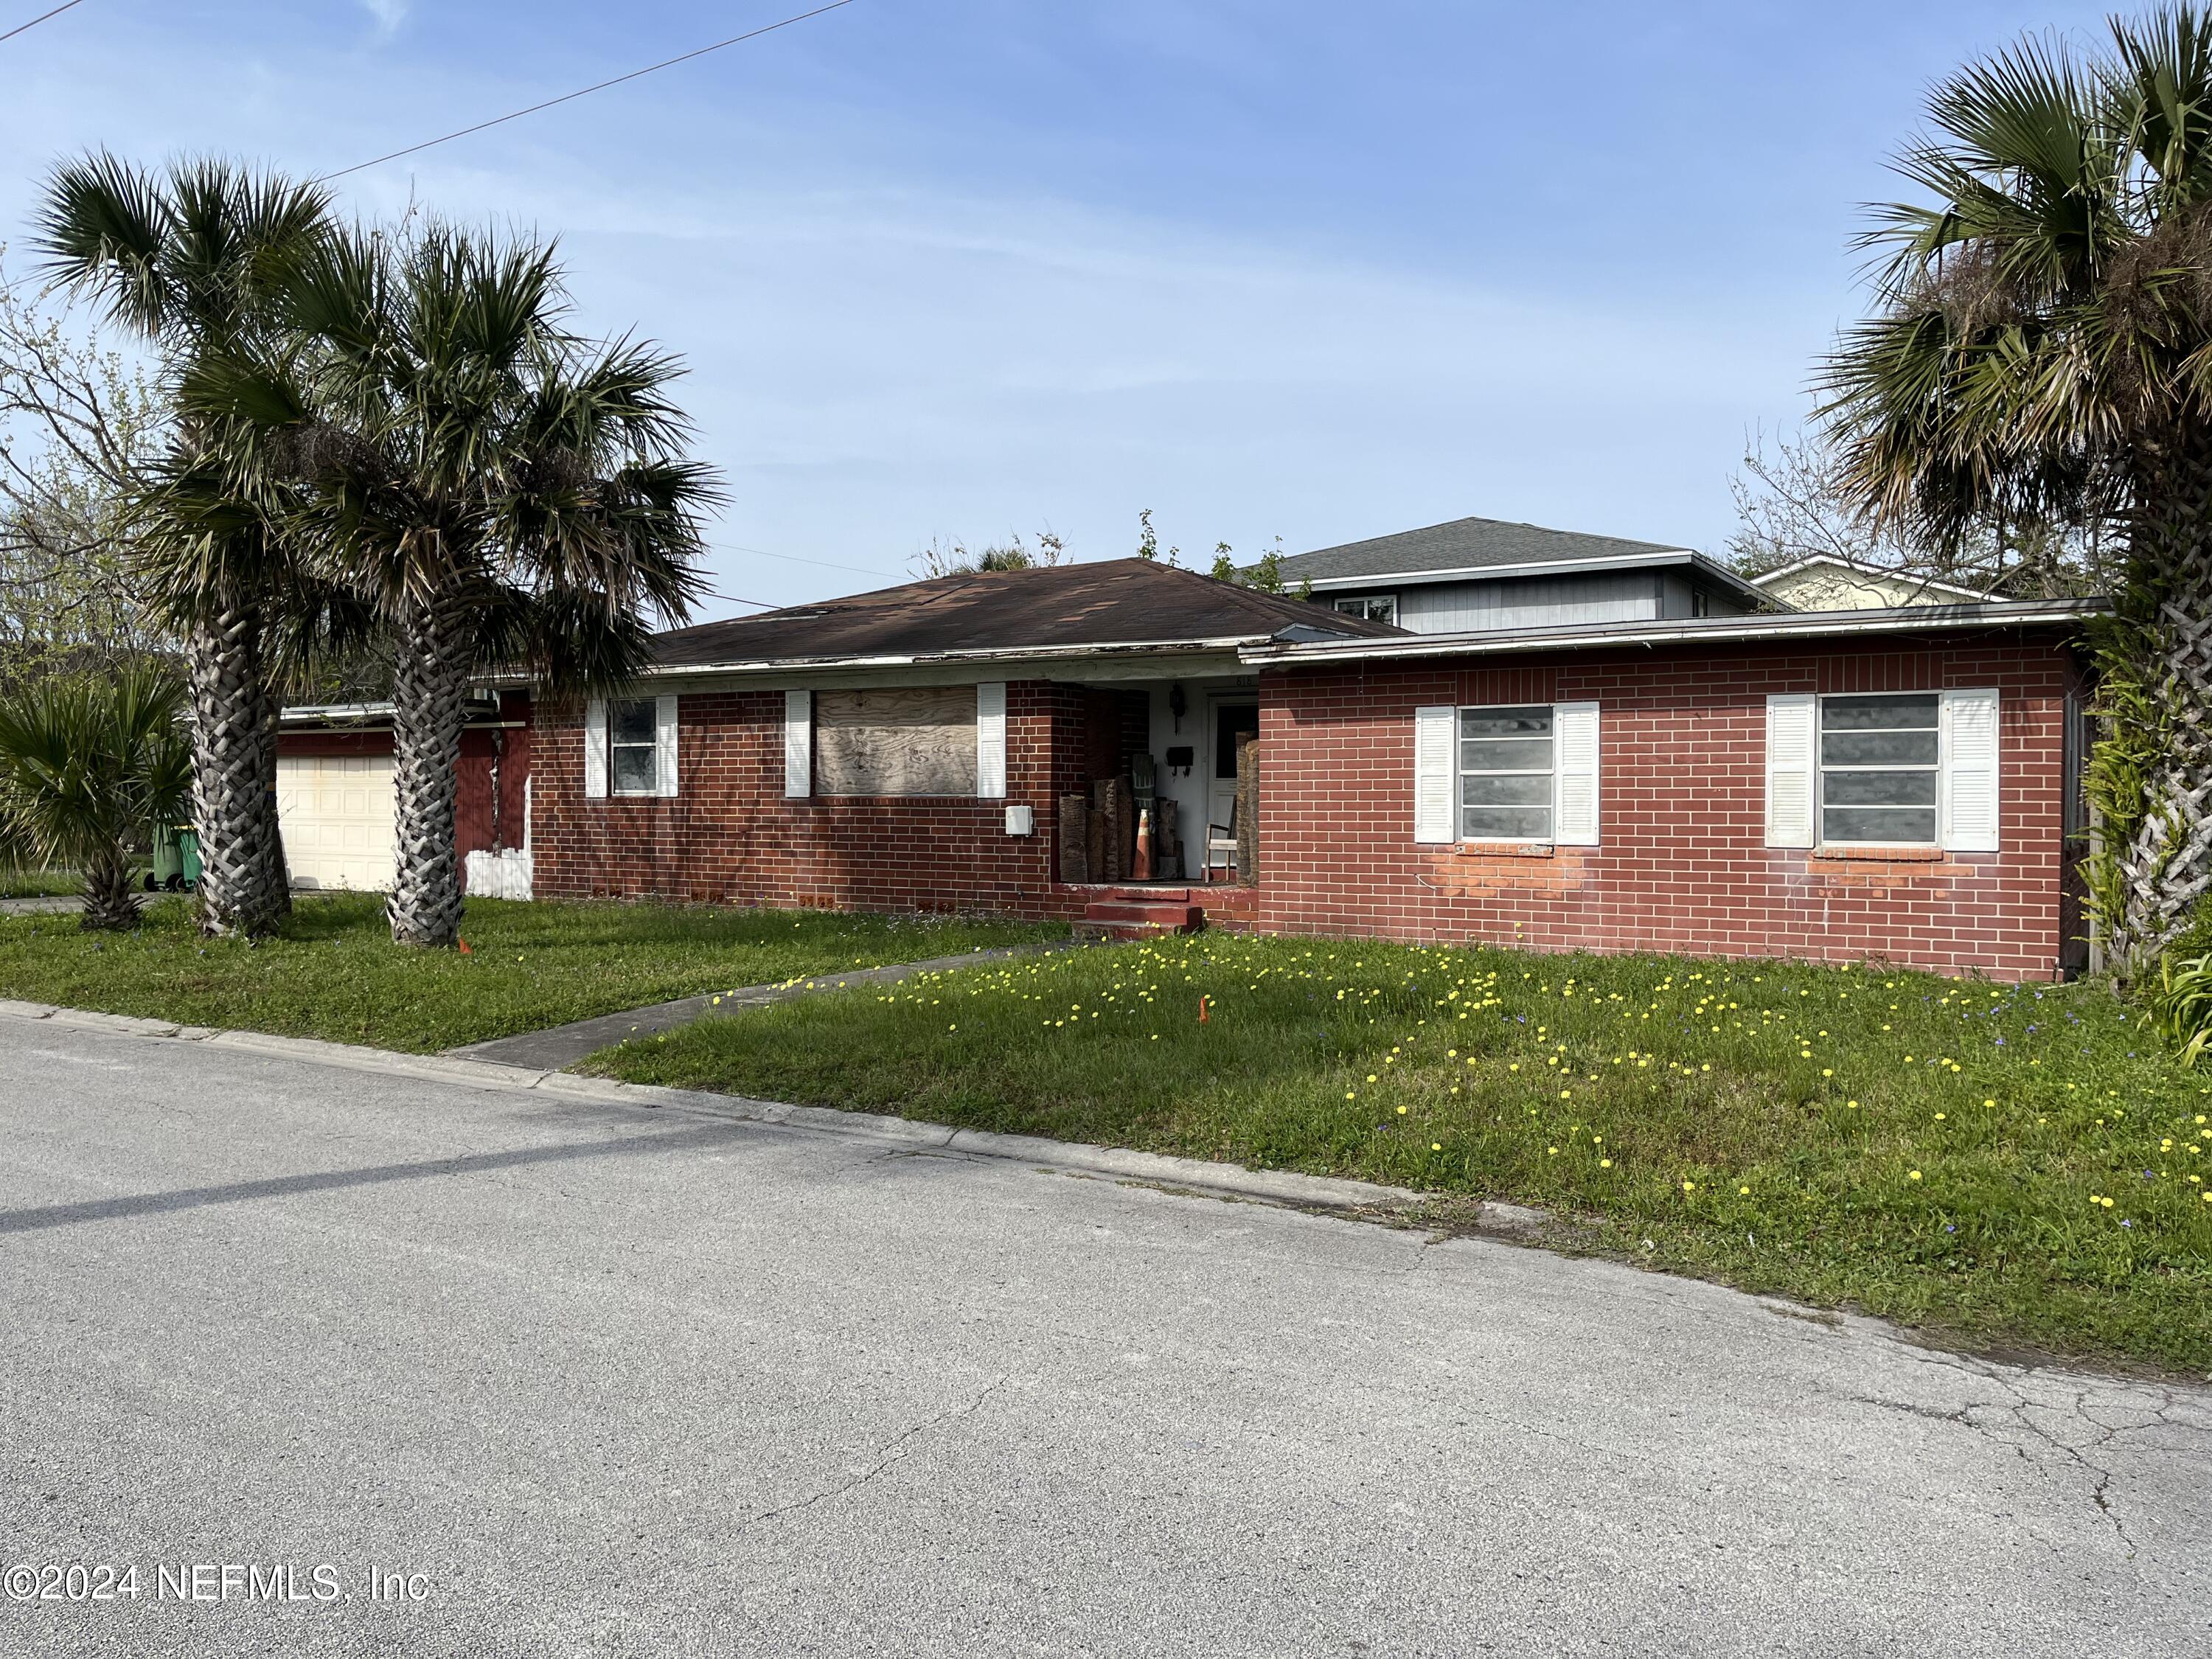 Jacksonville Beach, FL home for sale located at 818 S 4TH Street, Jacksonville Beach, FL 32250